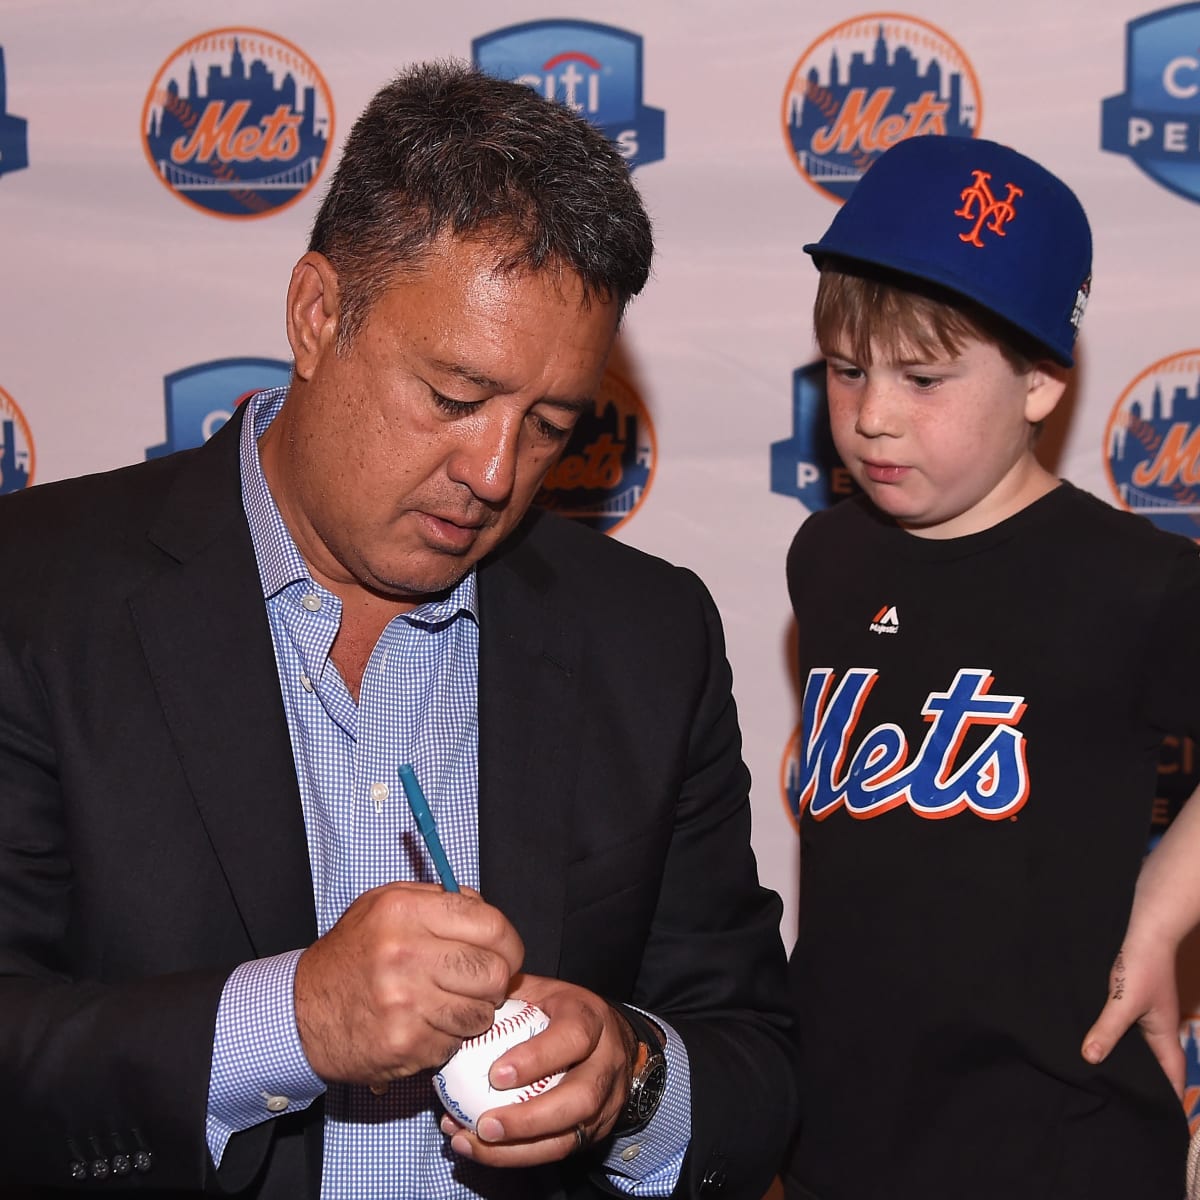 Ron Darling: Mets star, SNY broadcaster diagnosed with thyroid